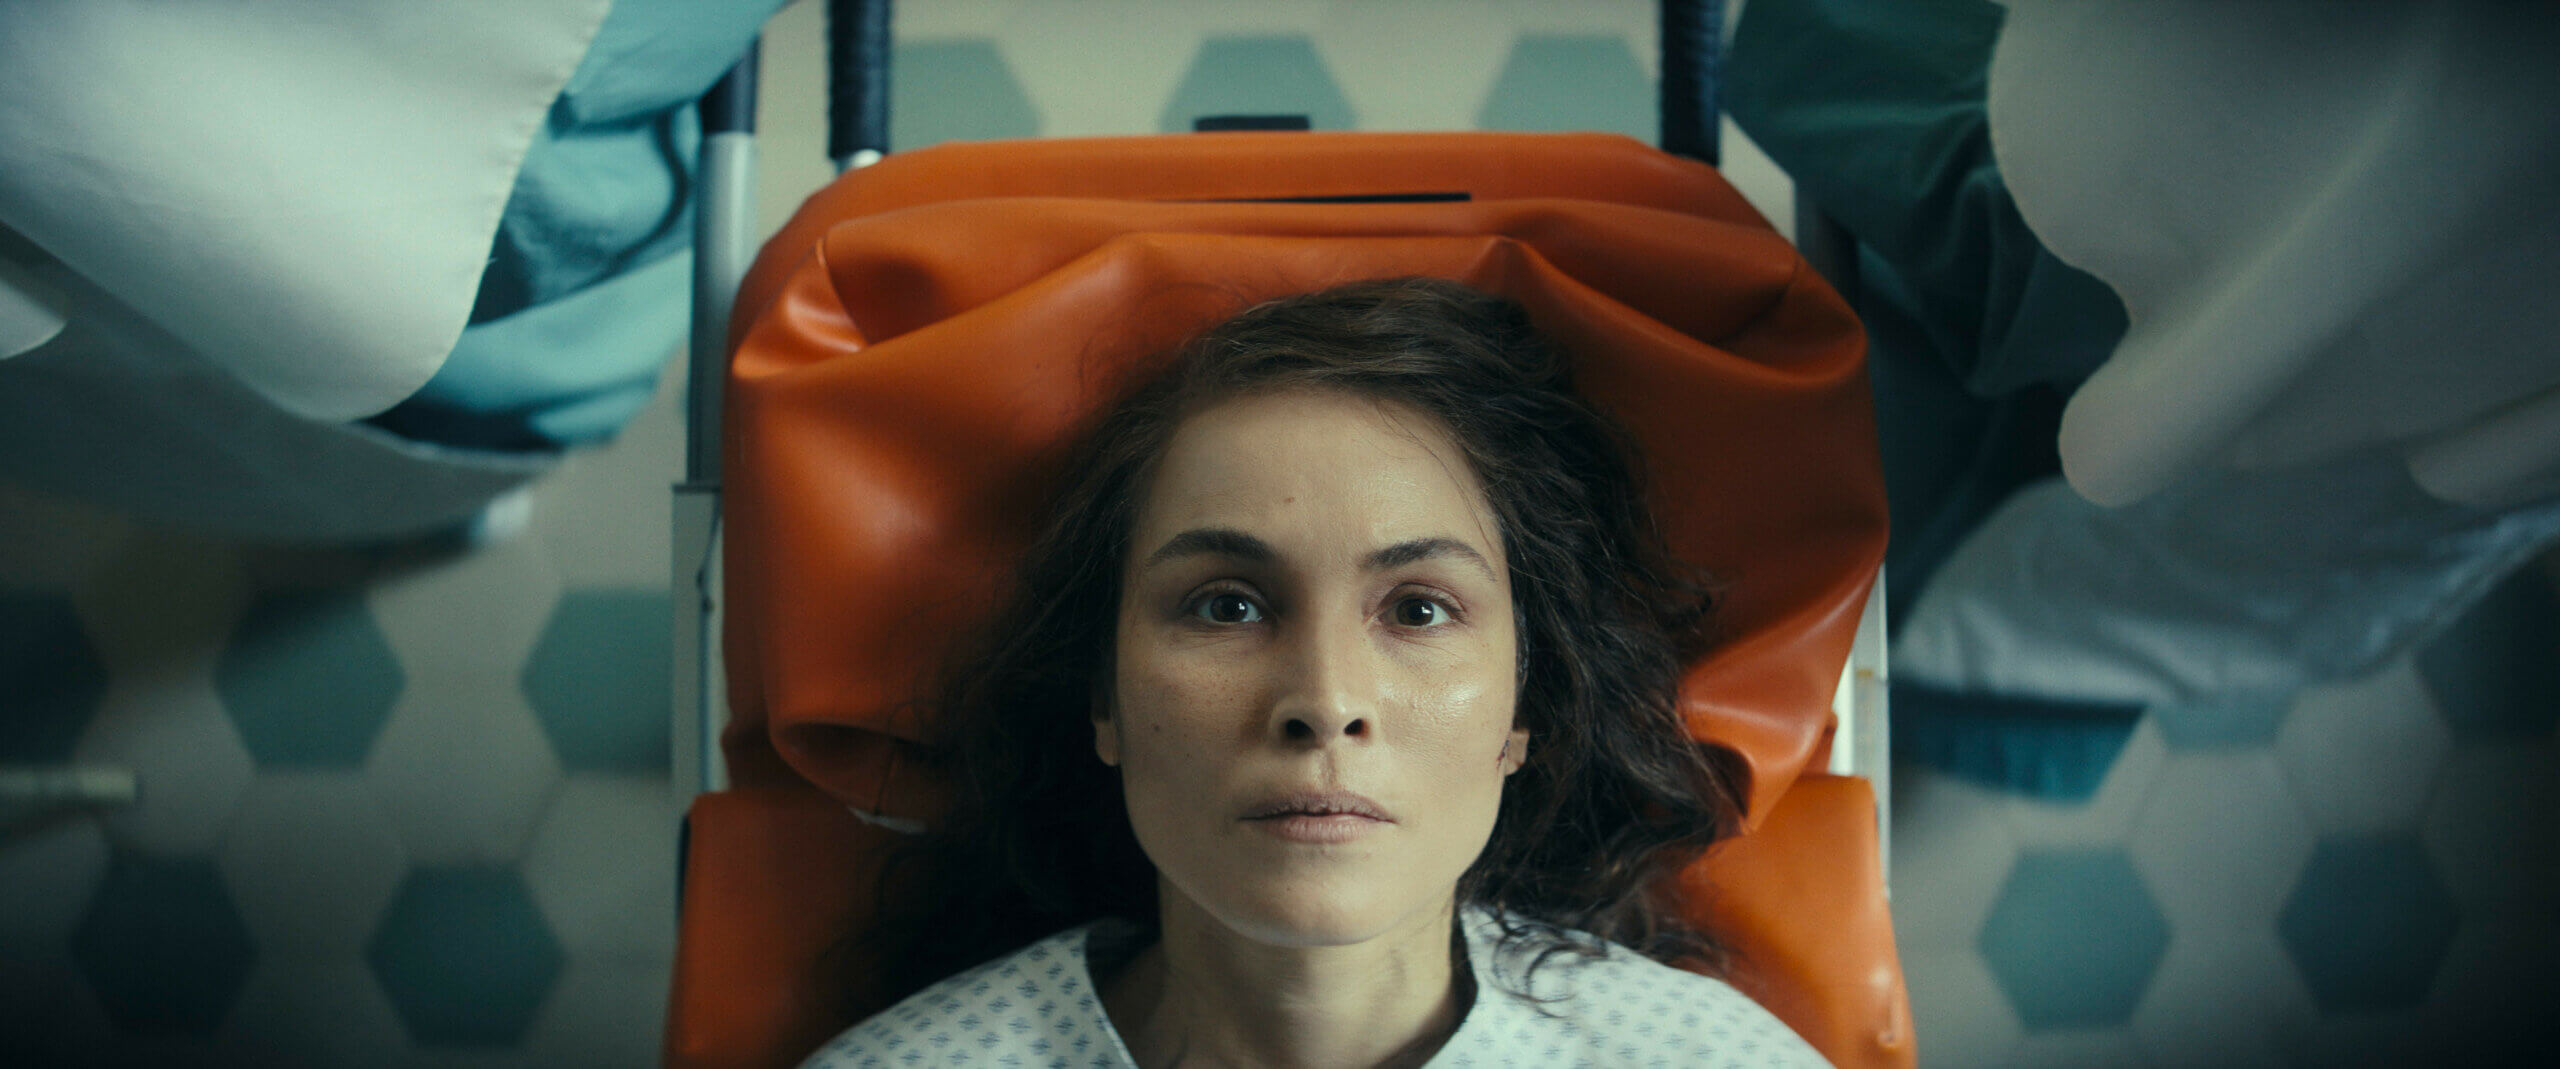 Noomi Rapace on a gurney bed looking blankly at the ceiling.